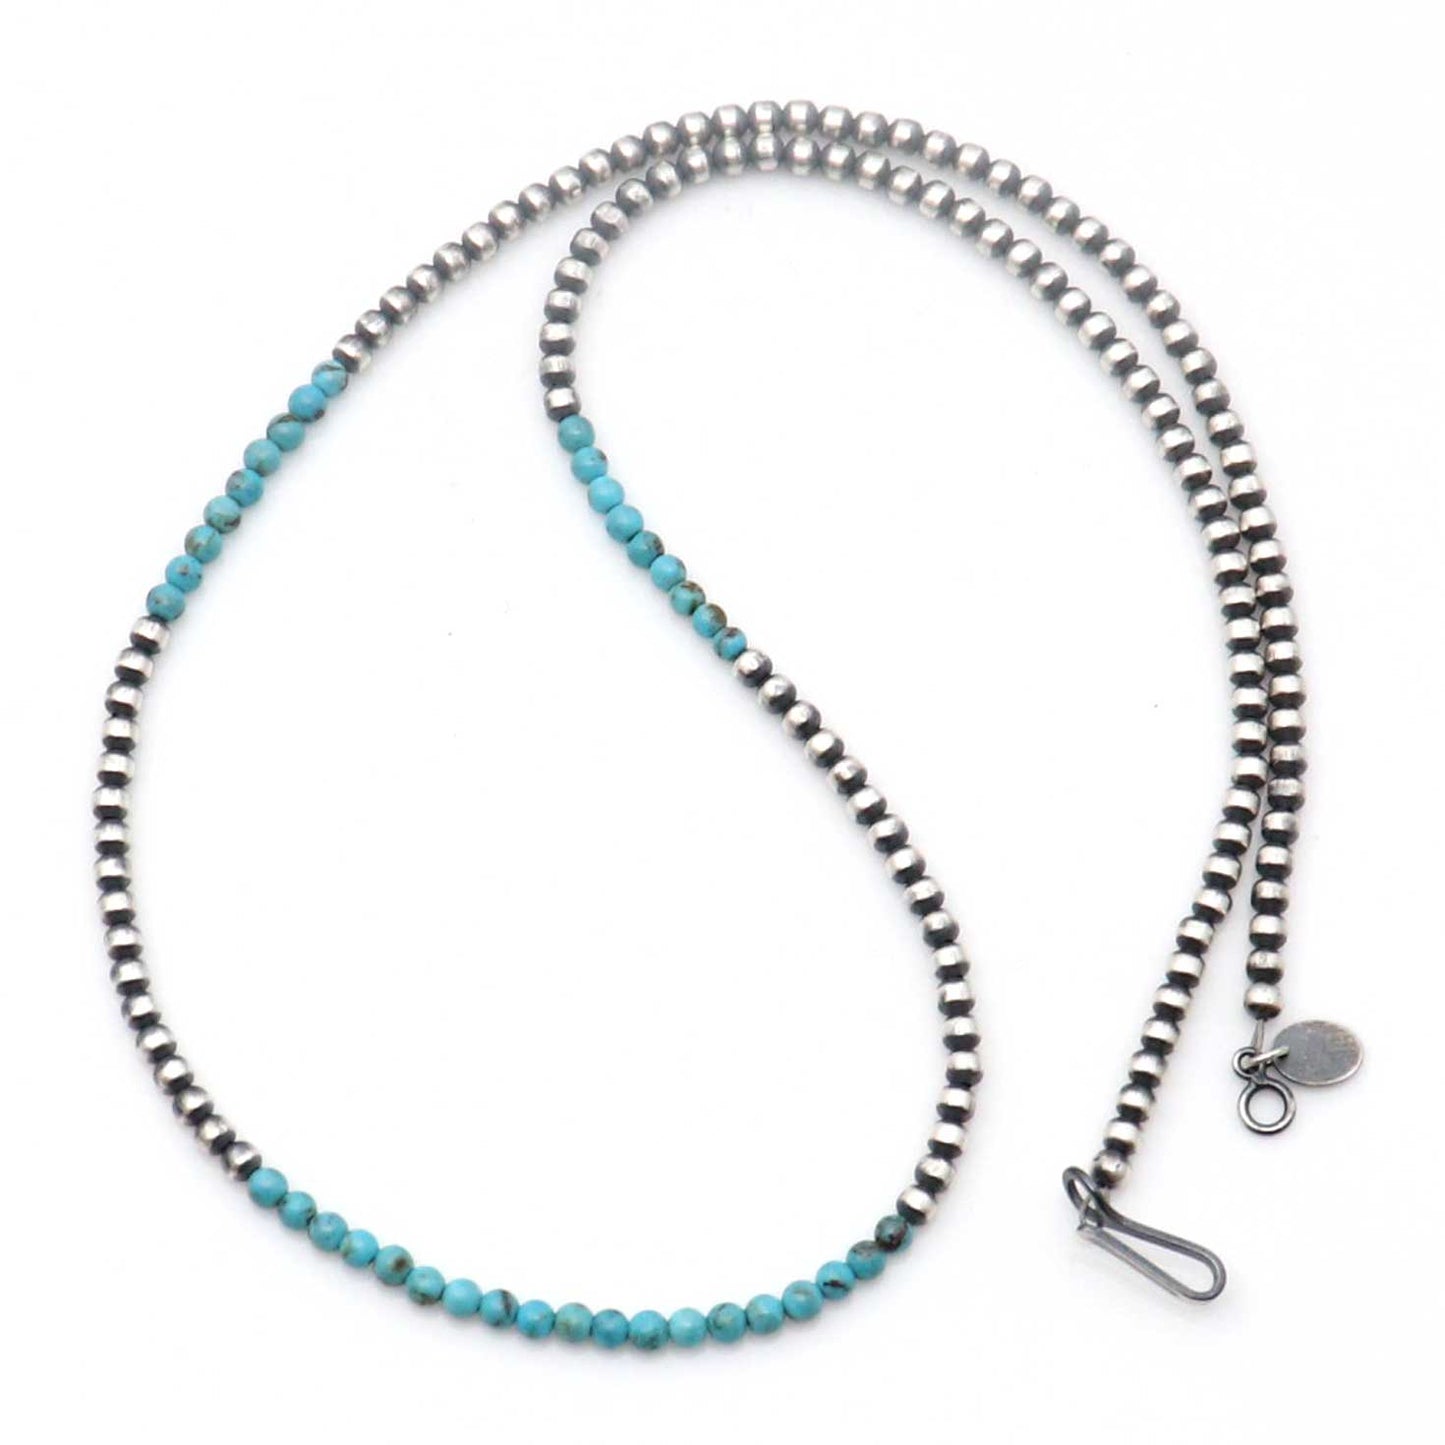 3 mm Silver Pearls With Turquoise Accent beads